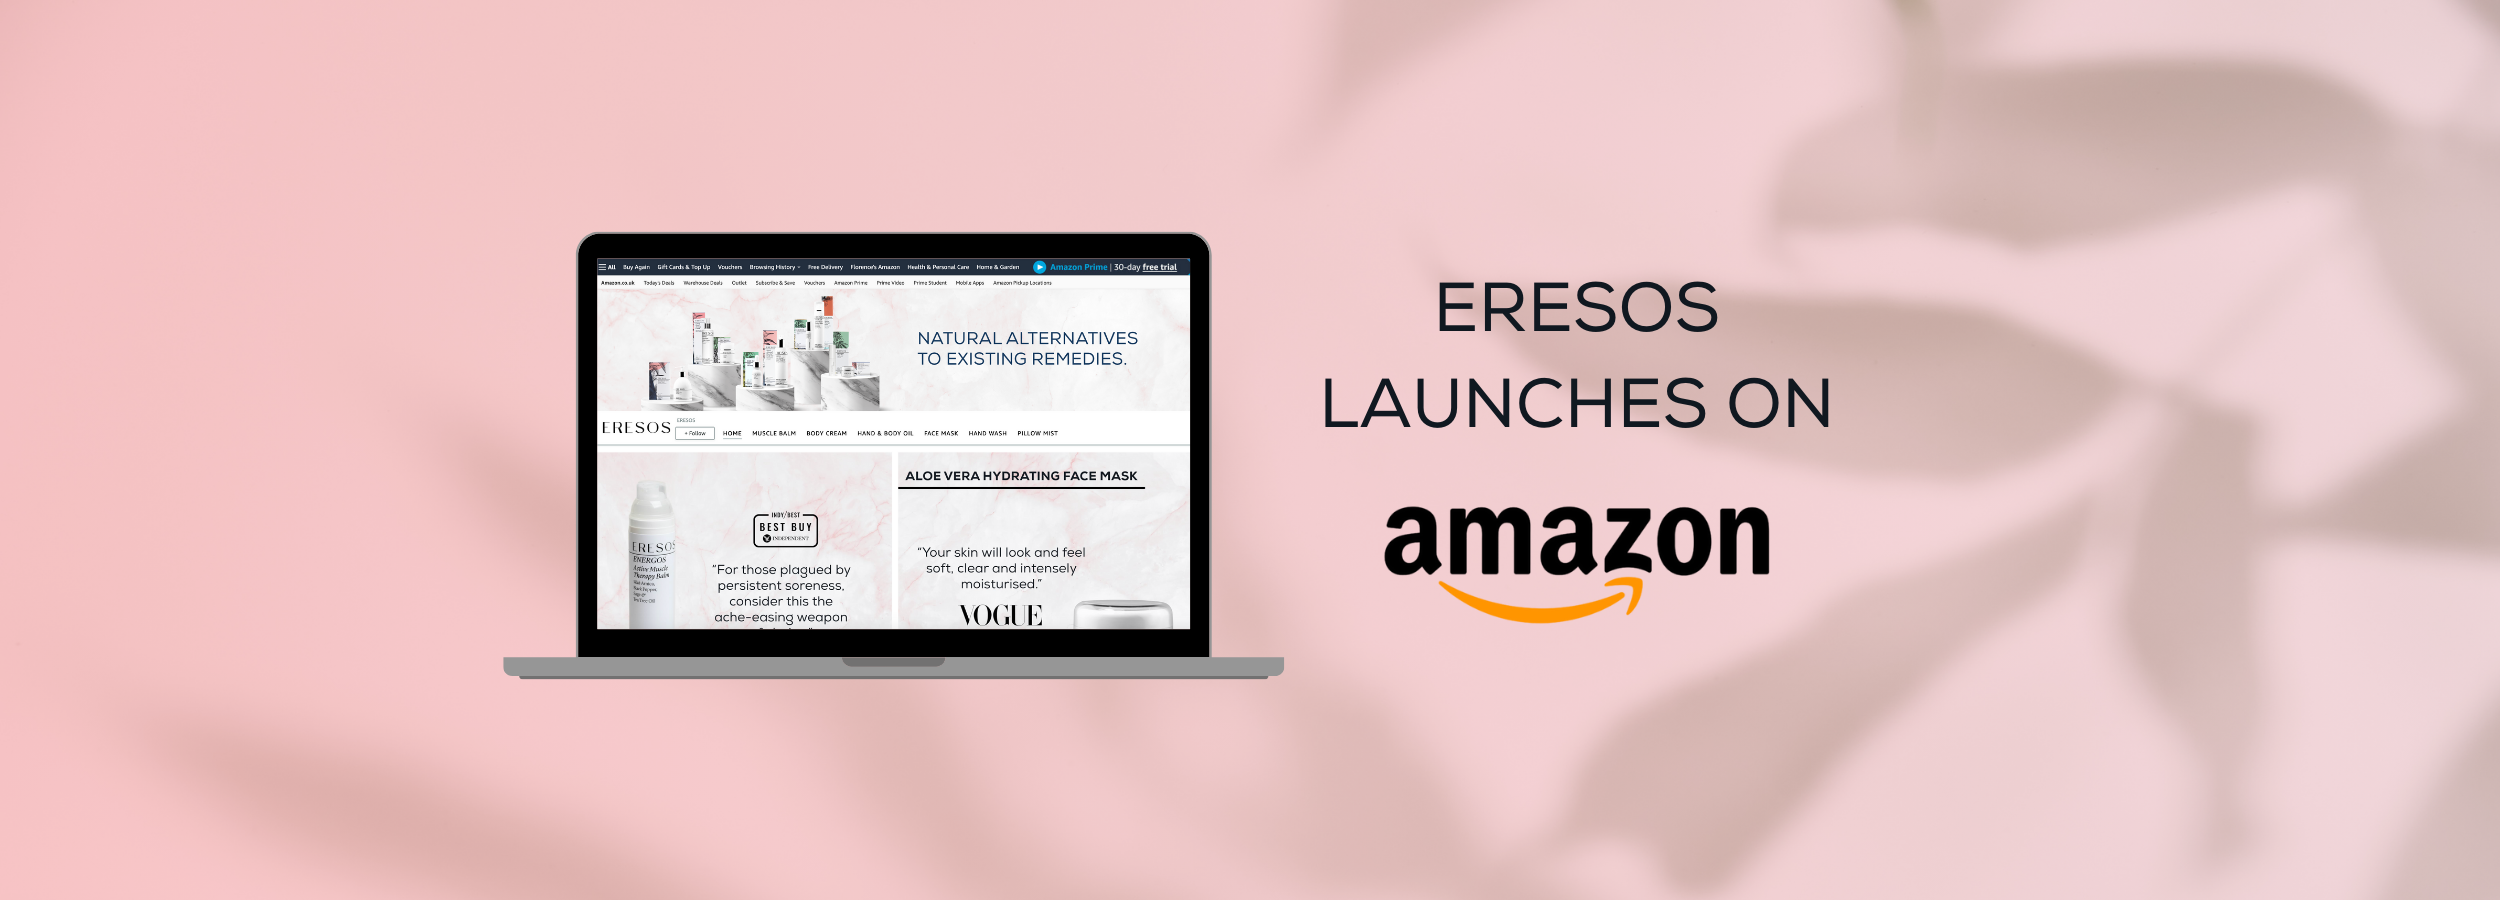 Eresos launches on amazon. Pink background and shop on laptop screen.